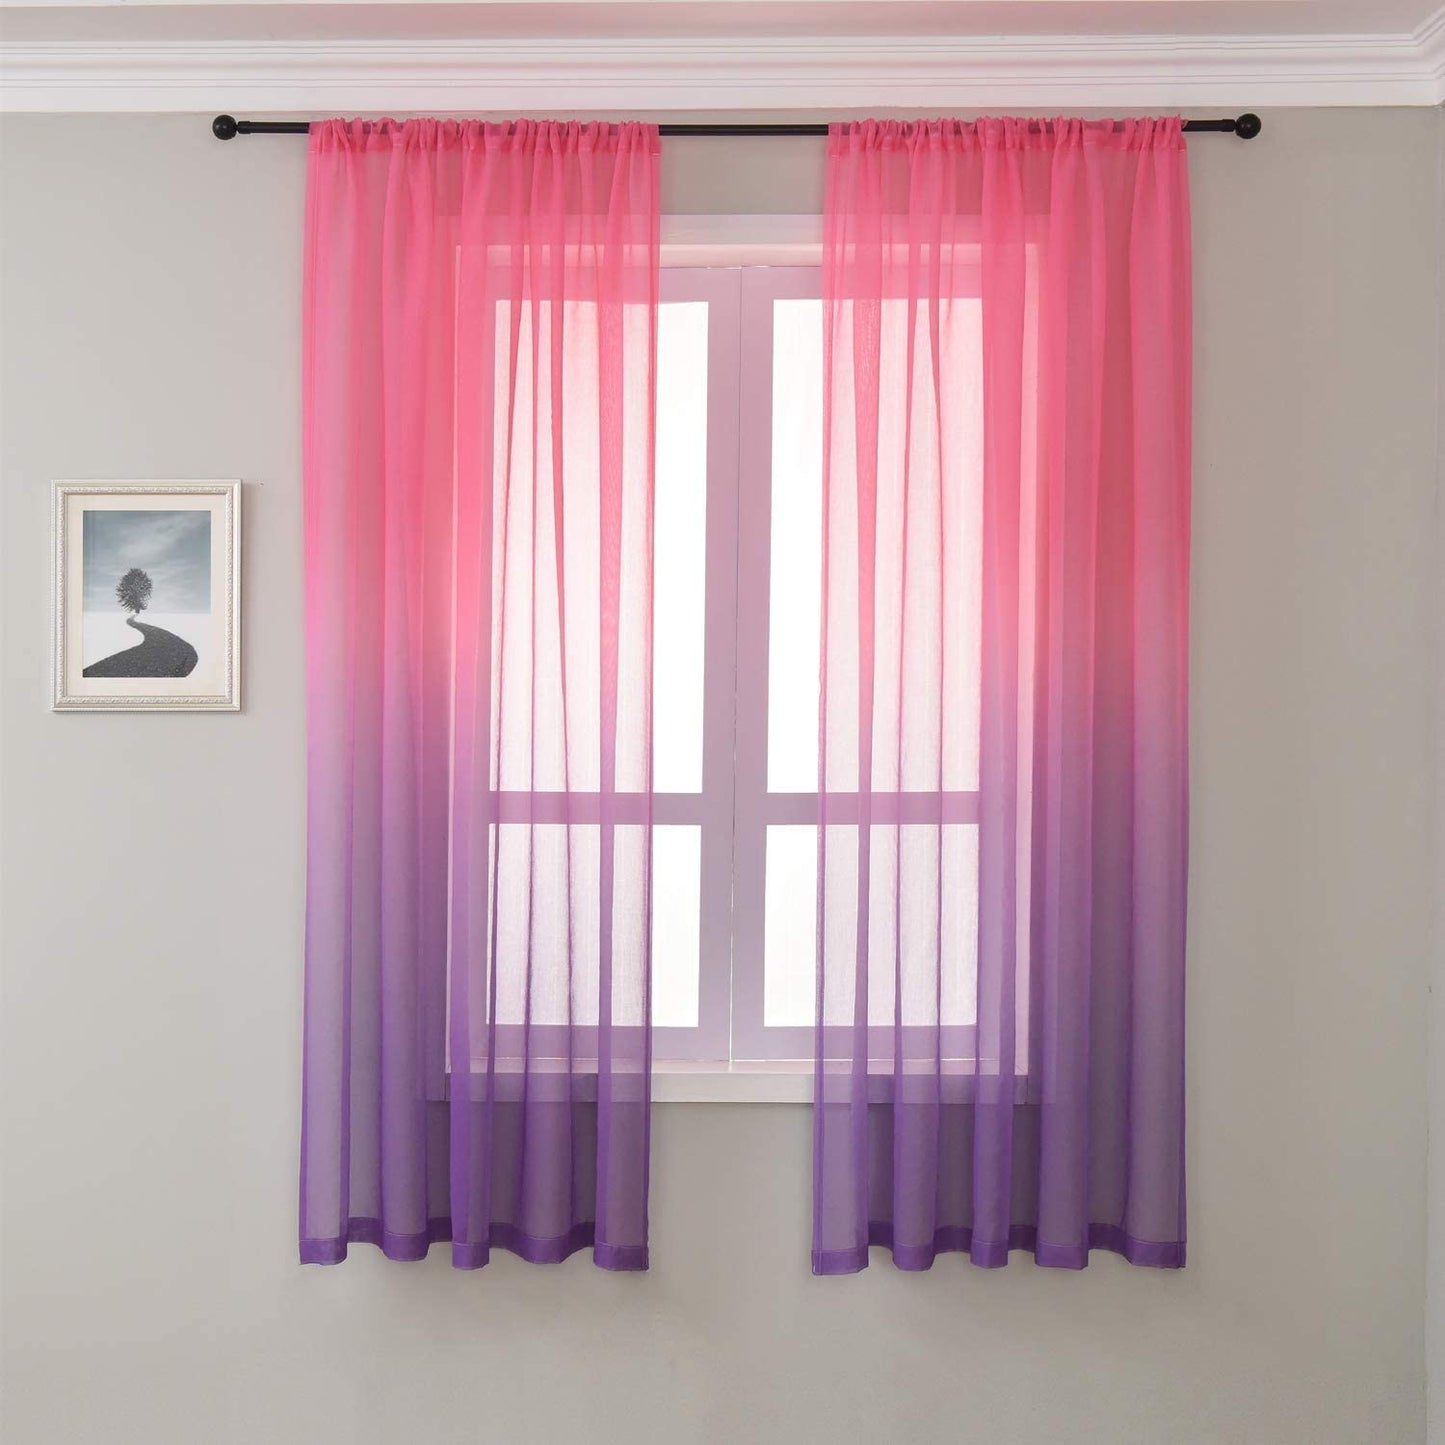 Sheer Curtain Linen Textured Voile Drapes with Fantastic Gradient Color